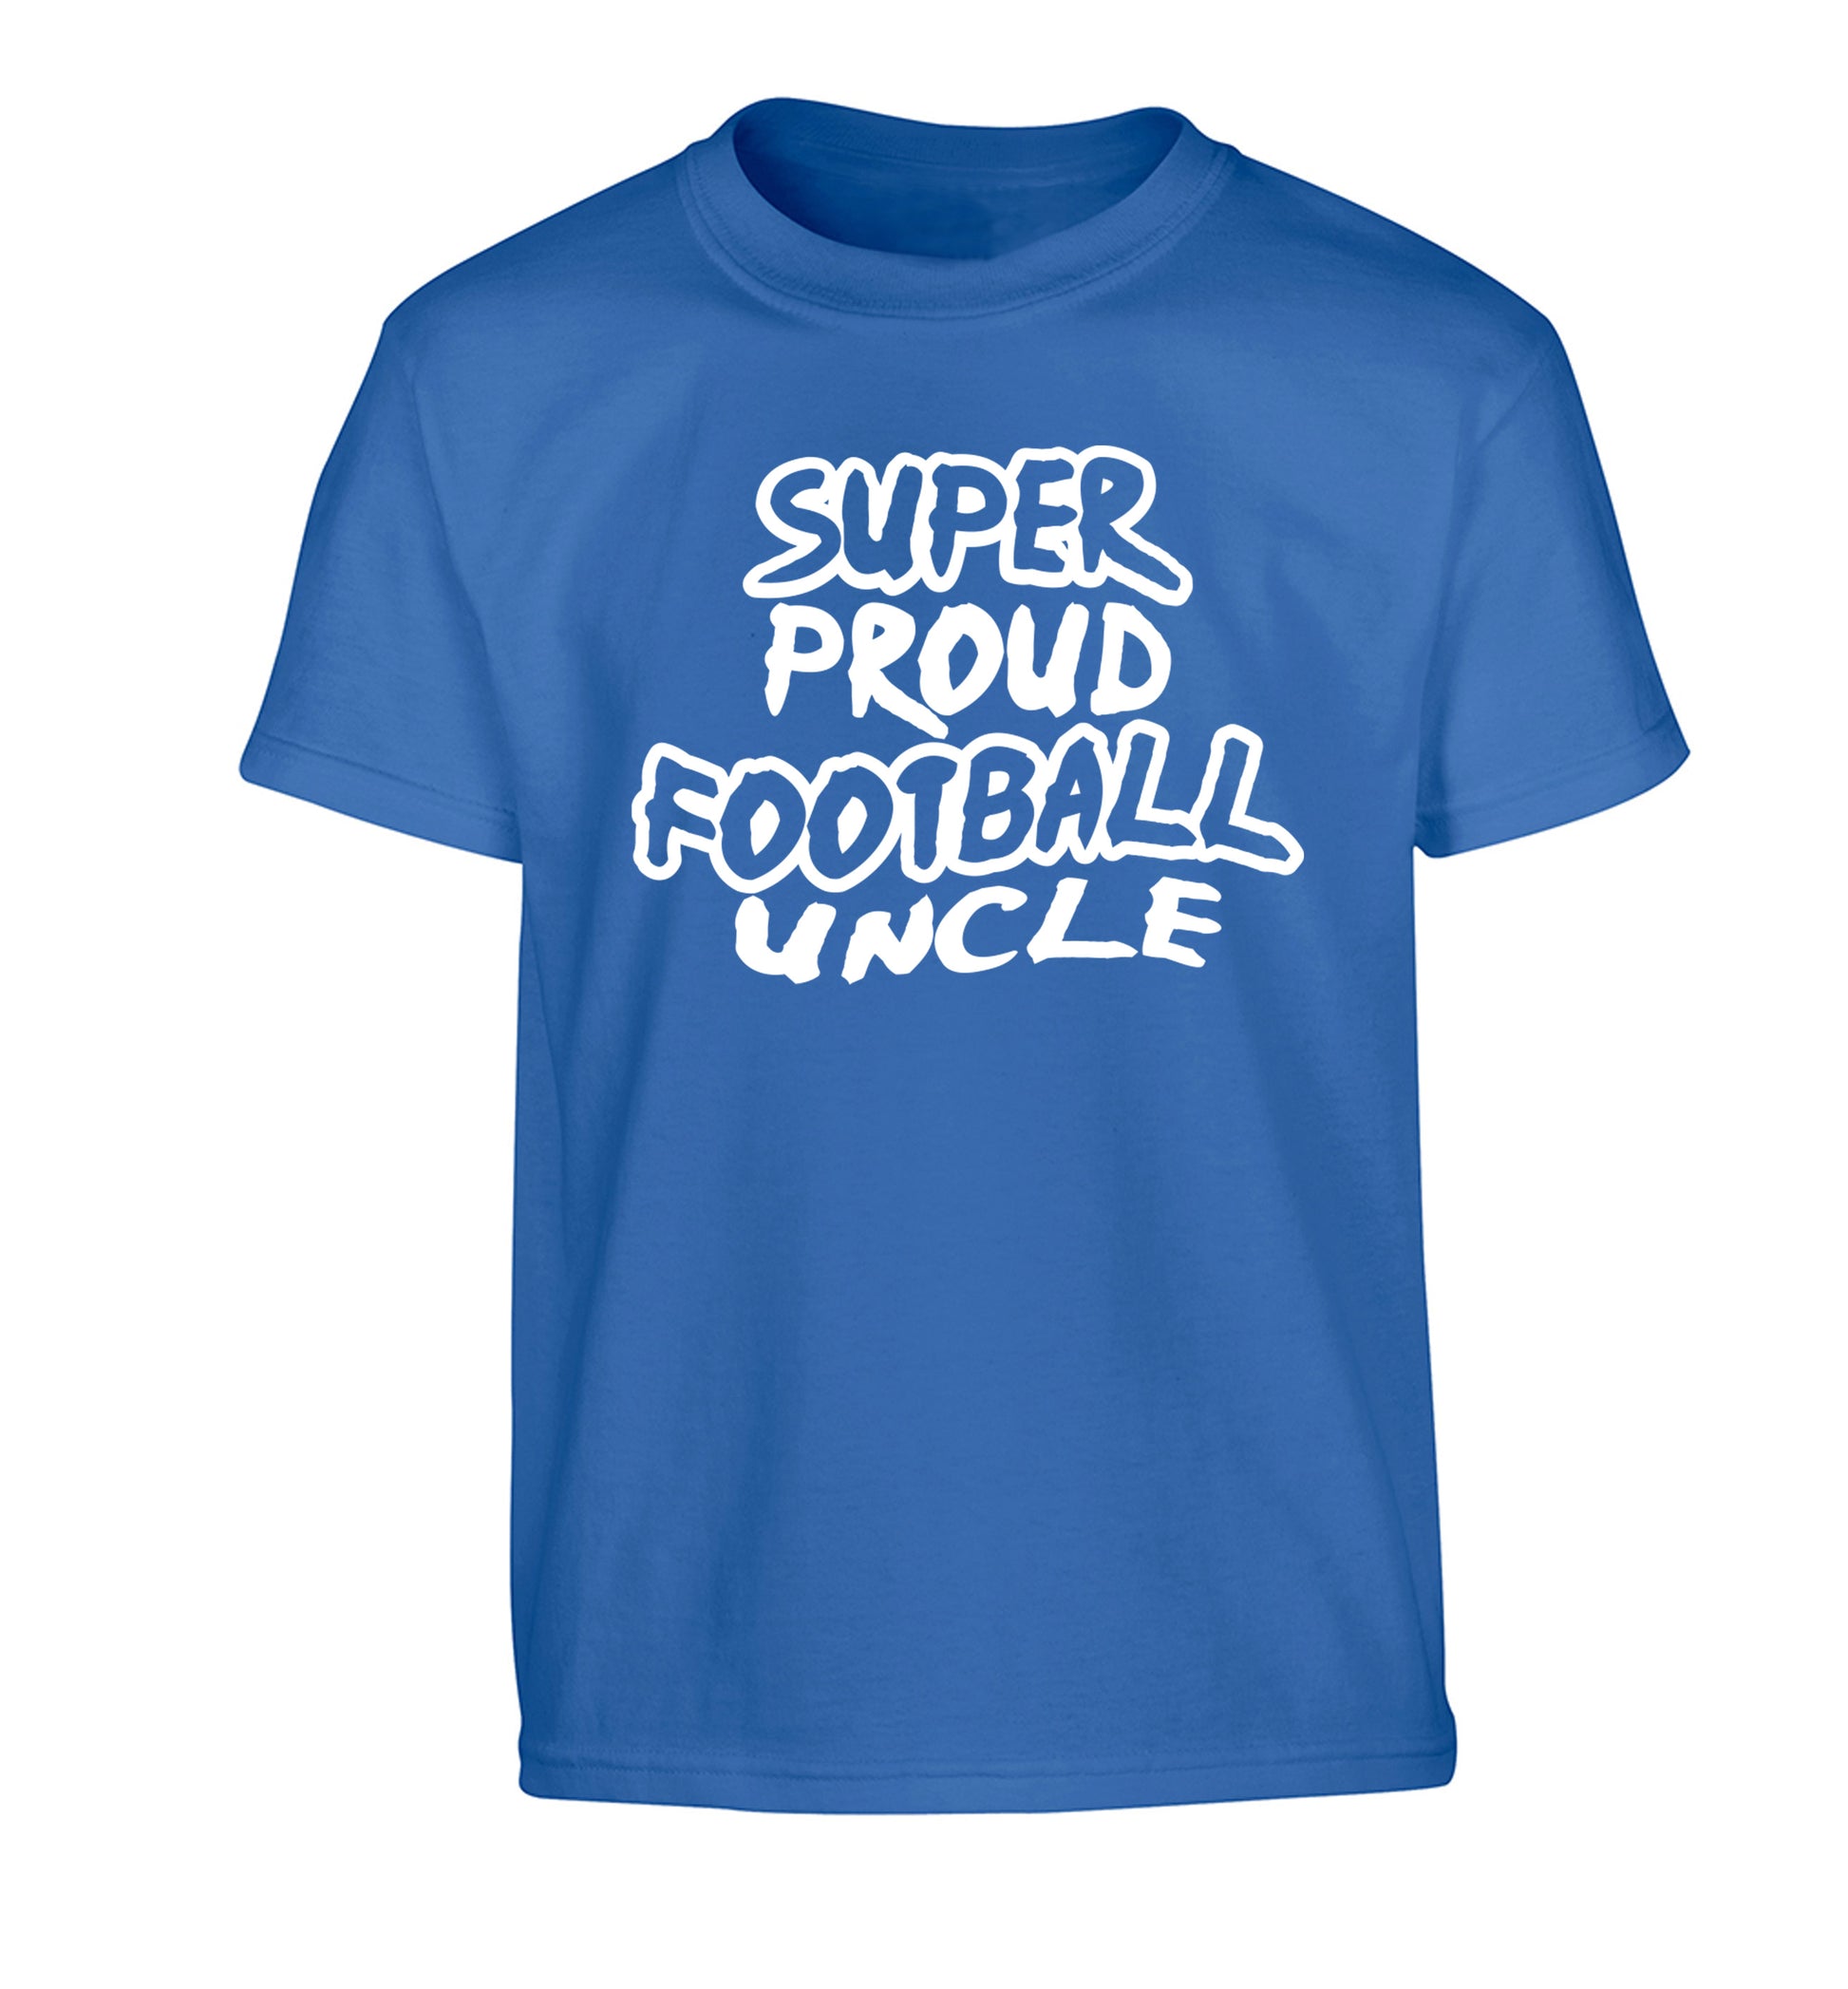 Super proud football uncle Children's blue Tshirt 12-14 Years